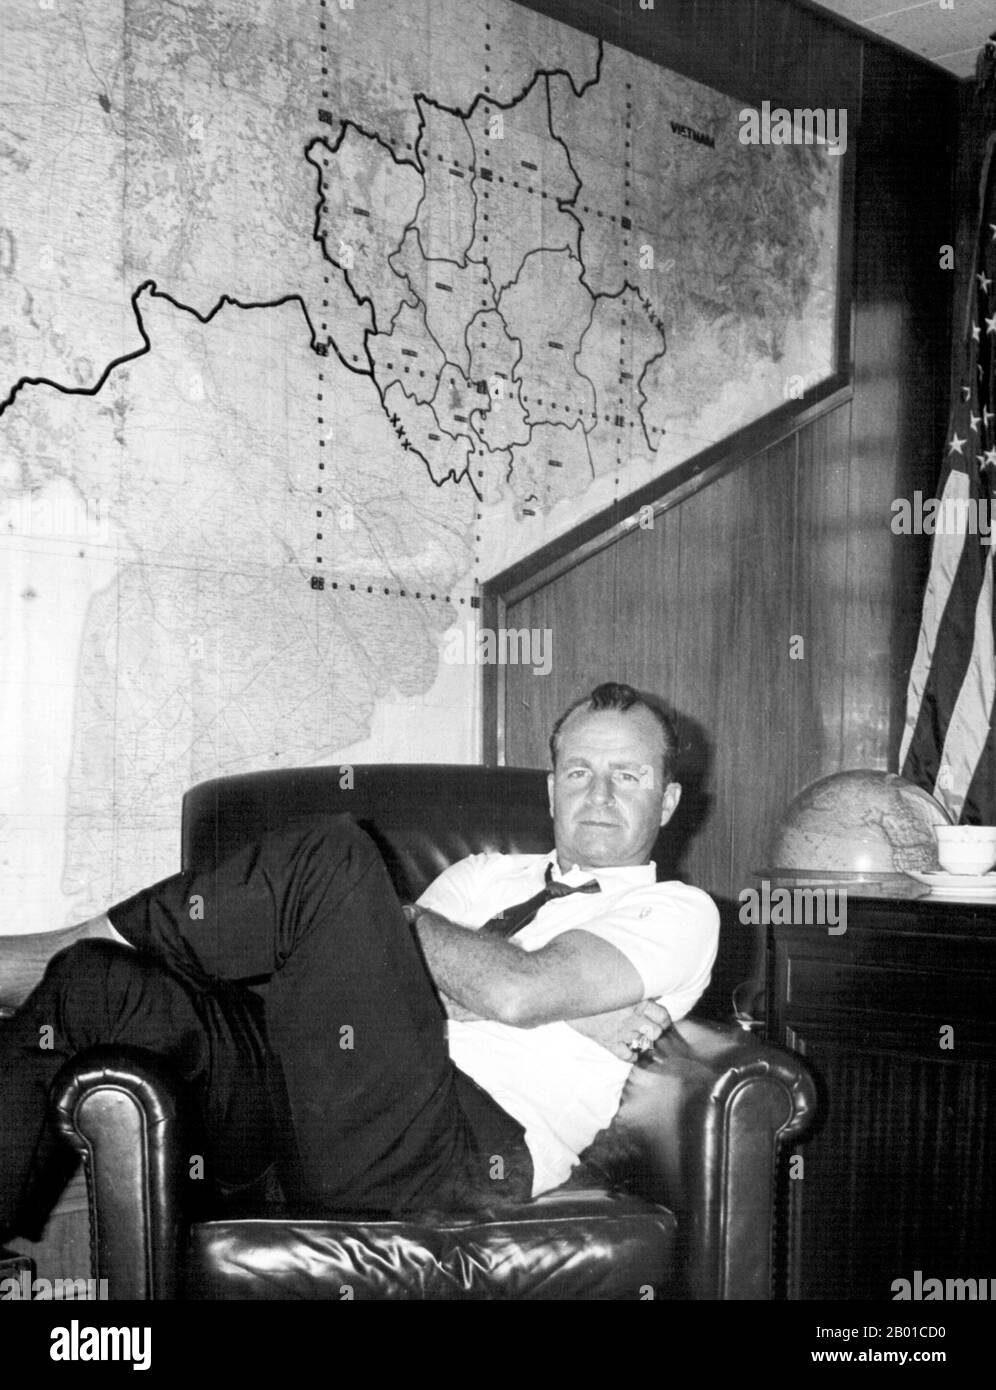 Vietnam: John Paul Vann (2 July 1924 - 9 June 1972) relaxing in his office in Saigon, c. 1966.  John Paul Vann was a Lieutenant Colonel in the United States Army, later retired, who became well-known for his role in the Vietnam War, especially in the Central Highlands and around Kontum. Although a civilian by the time the Vietnam War reached its zenith, he returned to active service under the auspices of the United States Agency for International Development, becoming the first civilian to command troops in regular combat there. Vann died in a helicopter crash in the Central Highlands in 1972. Stock Photo